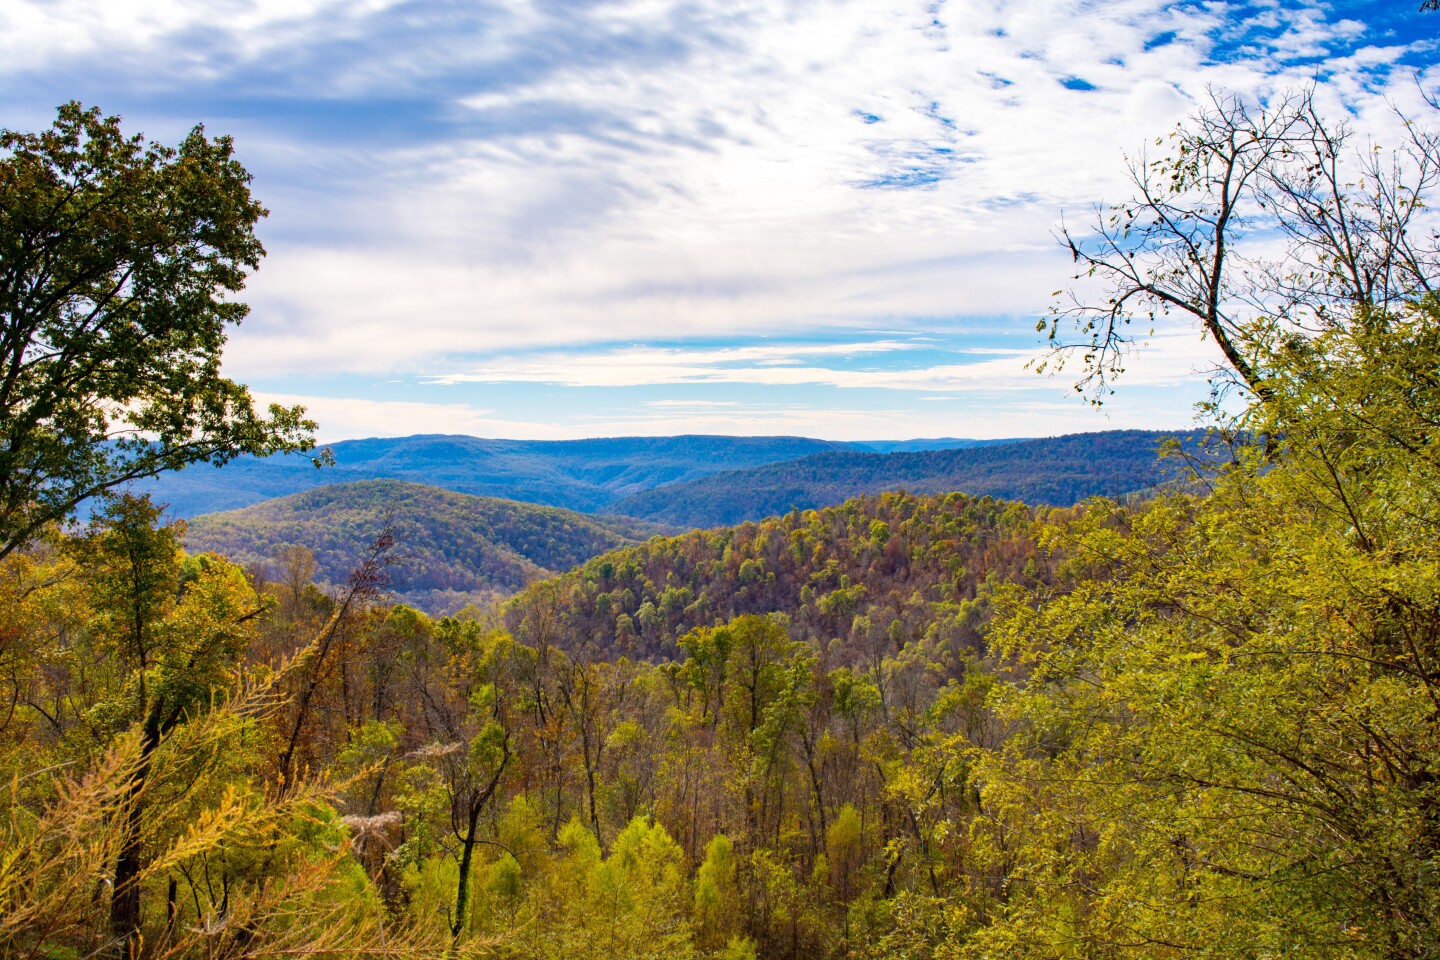 <h2>Ozark Highlands Trail, White Rock Mountain and Lake Fort Smith State Park</h2> <ul>   <li><b>Book now:</b> <a class="Link" href="https://whiterockmountain.com/lodge-cabins/" rel="noopener">White Rock Mountain Lodge and Cabins</a>; $133–223 per night</li>   <li><b>Book now:</b> <a class="Link" href="https://www.arkansasstateparks.com/parks/lake-fort-smith-state-park" rel="noopener">Lake Fort Smith State Park</a>; $155–$175 per night</li>  </ul> <p>Located in Northwest Arkansas, the 270-mile Ozark Highlands Trail is brimming with hiking opportunities that run through state parks and the Ozark National Forest. While the whole trail can be completed as a thru-hike over a few weeks, visitors can tackle a section or two and still see plenty of waterfalls, rivers, and forested trails.<br>Book a private cabin at <a class="Link" href="https://www.arkansasstateparks.com/parks/lake-fort-smith-state-park" rel="noopener">Lake Fort Smith State Park</a> (operated by the park), the trail’s starting point in Northwest Arkansas, and you can experience 17 miles of the trail before stopping at a private cabin at <a class="Link" href="https://whiterockmountain.com/lodge-cabins/" rel="noopener">White Rock Mountain Lodge and Cabins</a>, operated by White Rock Recreation Management. Both destinations are fully equipped with kitchens and private bathrooms, but you’ll have to bring your own linens to White Rock Mountain. (Note: You’ll need to arrange your own transportation back to the starting trailhead.)</p>